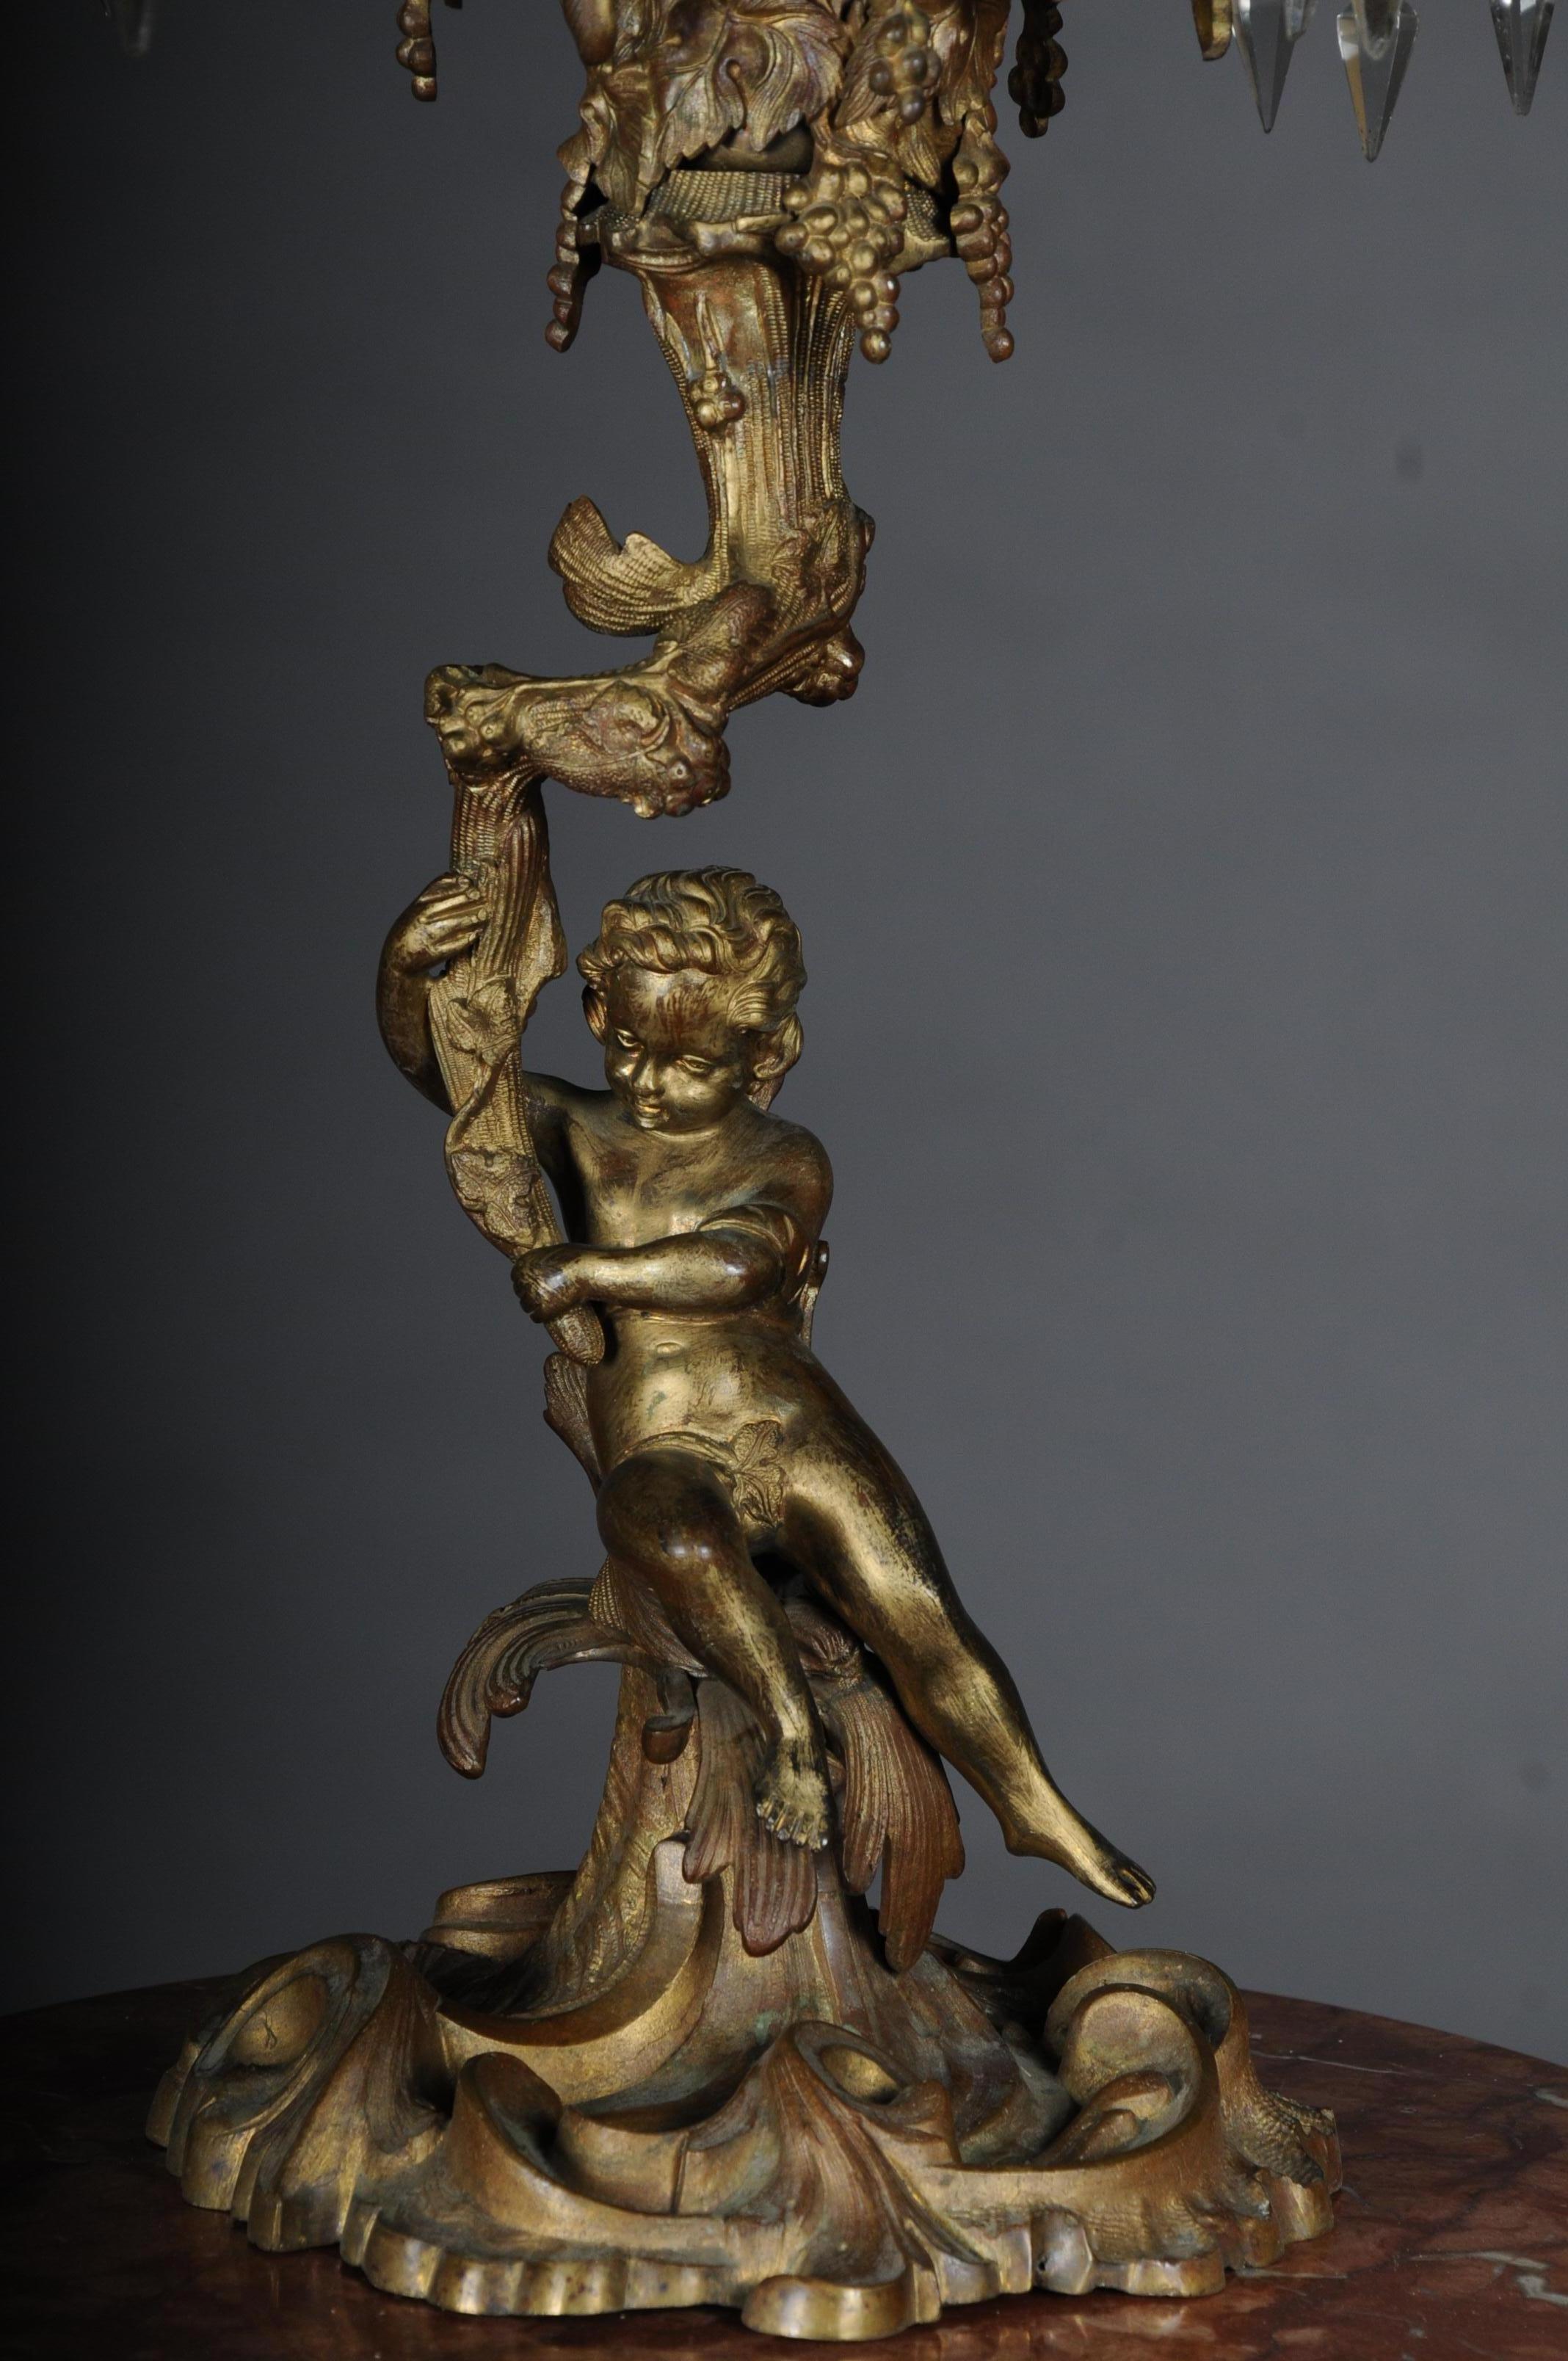 Rococo candlesticks Bronze gilded, circa 1870.

Antique, weighty and richly decorated Rococo bronze candlestick with prismatic blinds. Putto holding a candle crown which consists of 7 lighthouses. Extremely decorative and finely